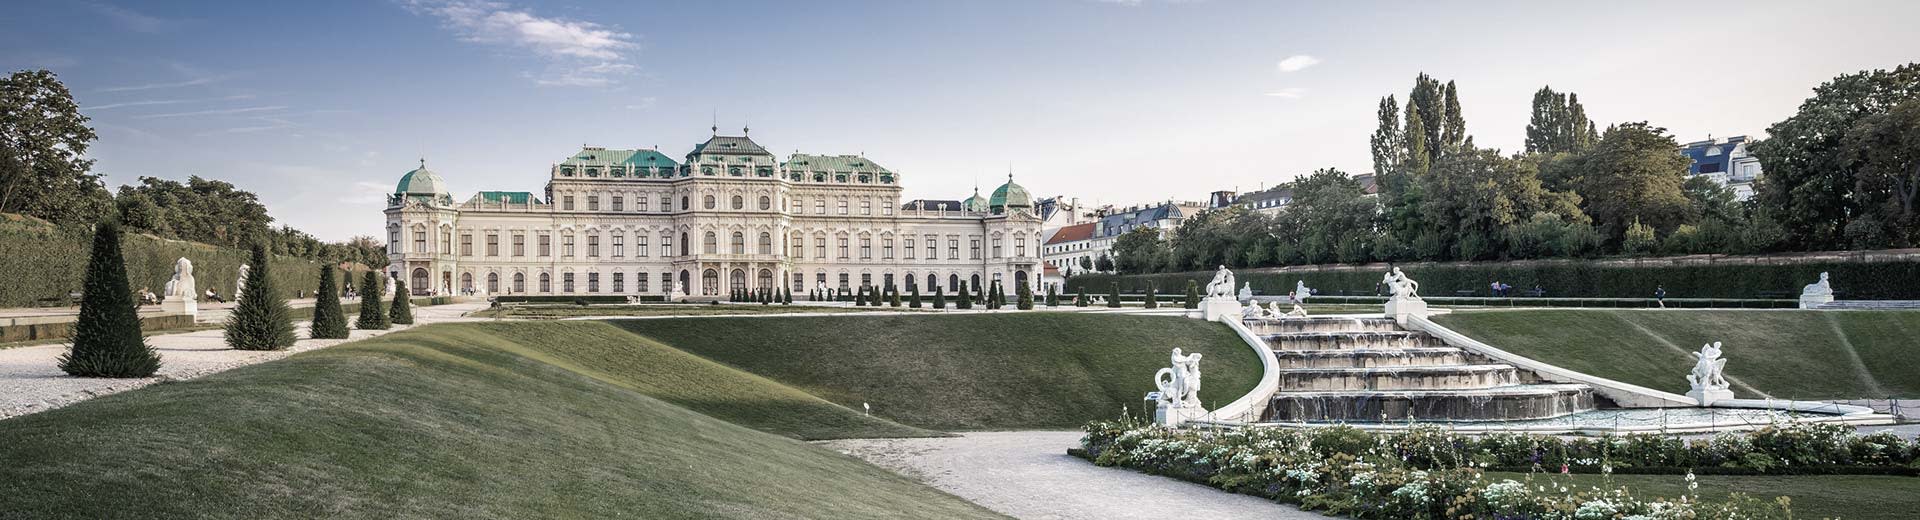 The world-famous Schönbrunn Palace lies among it's incedibly manicured lawns on a beautiful, clear day.